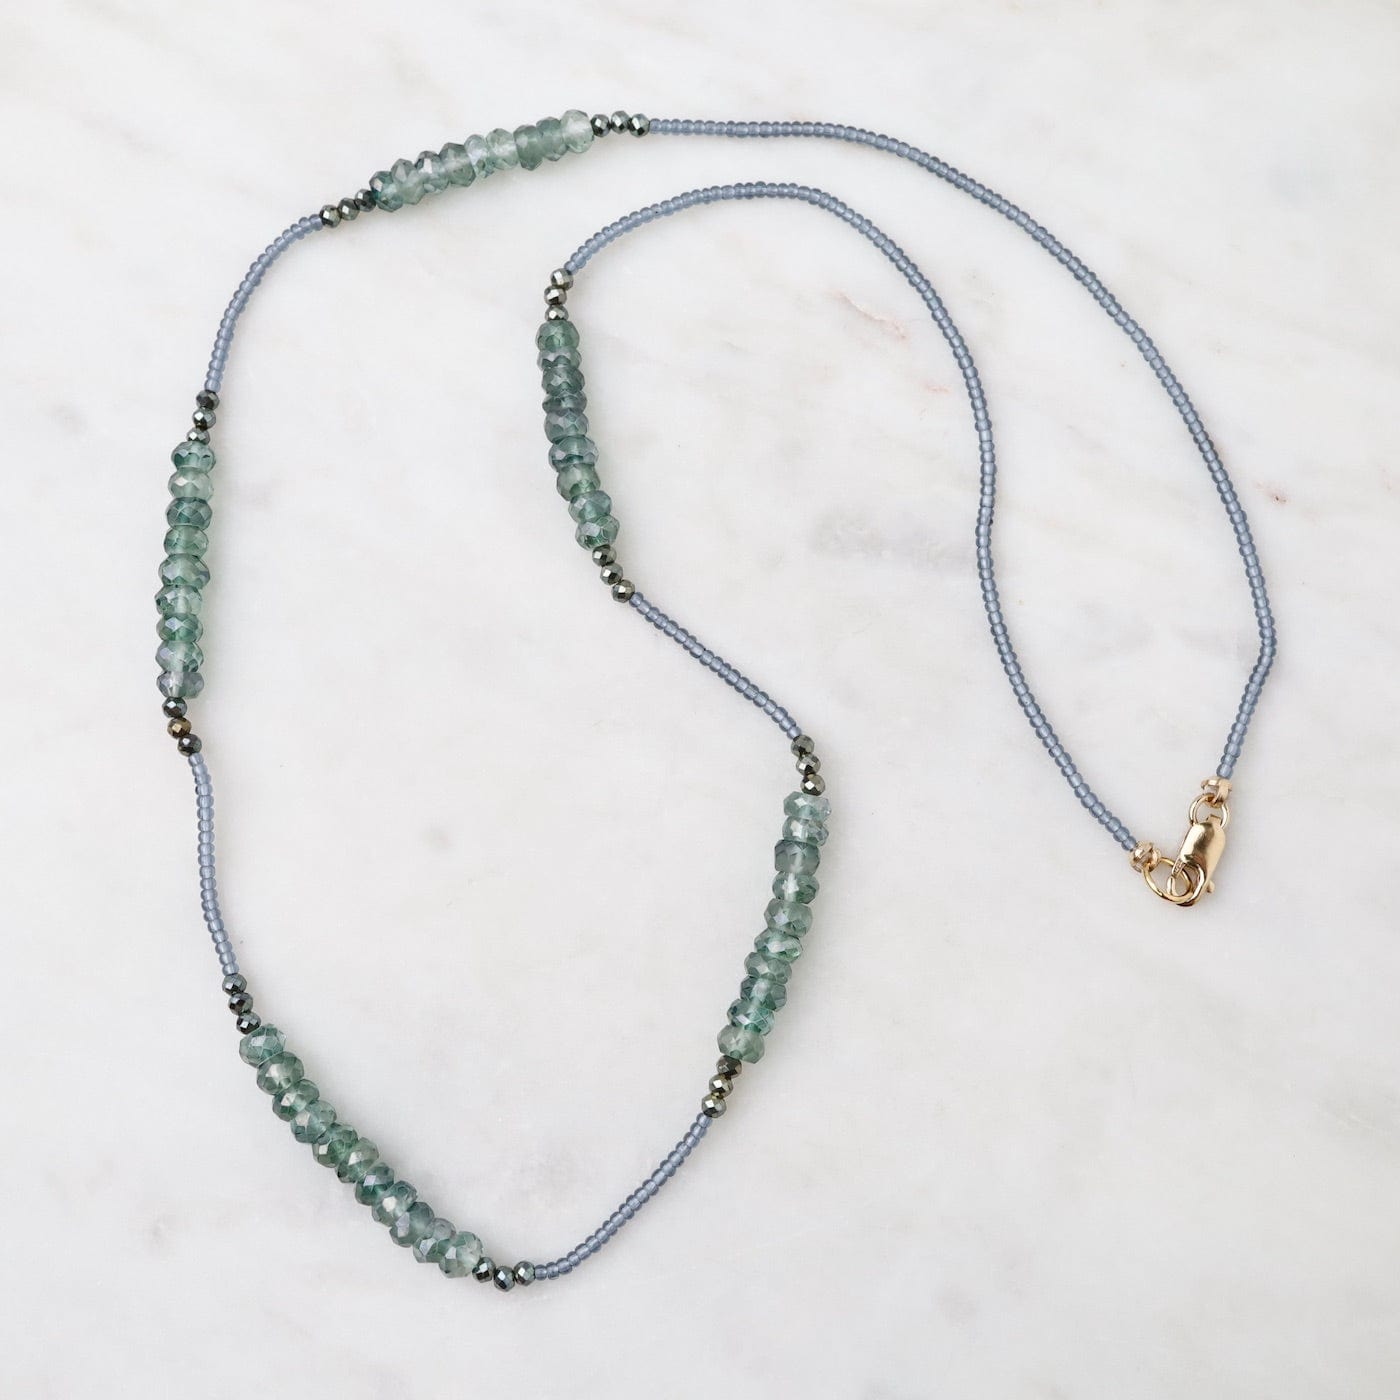 NKL Grey Seed, Pyrite & Mystic Bead Necklace